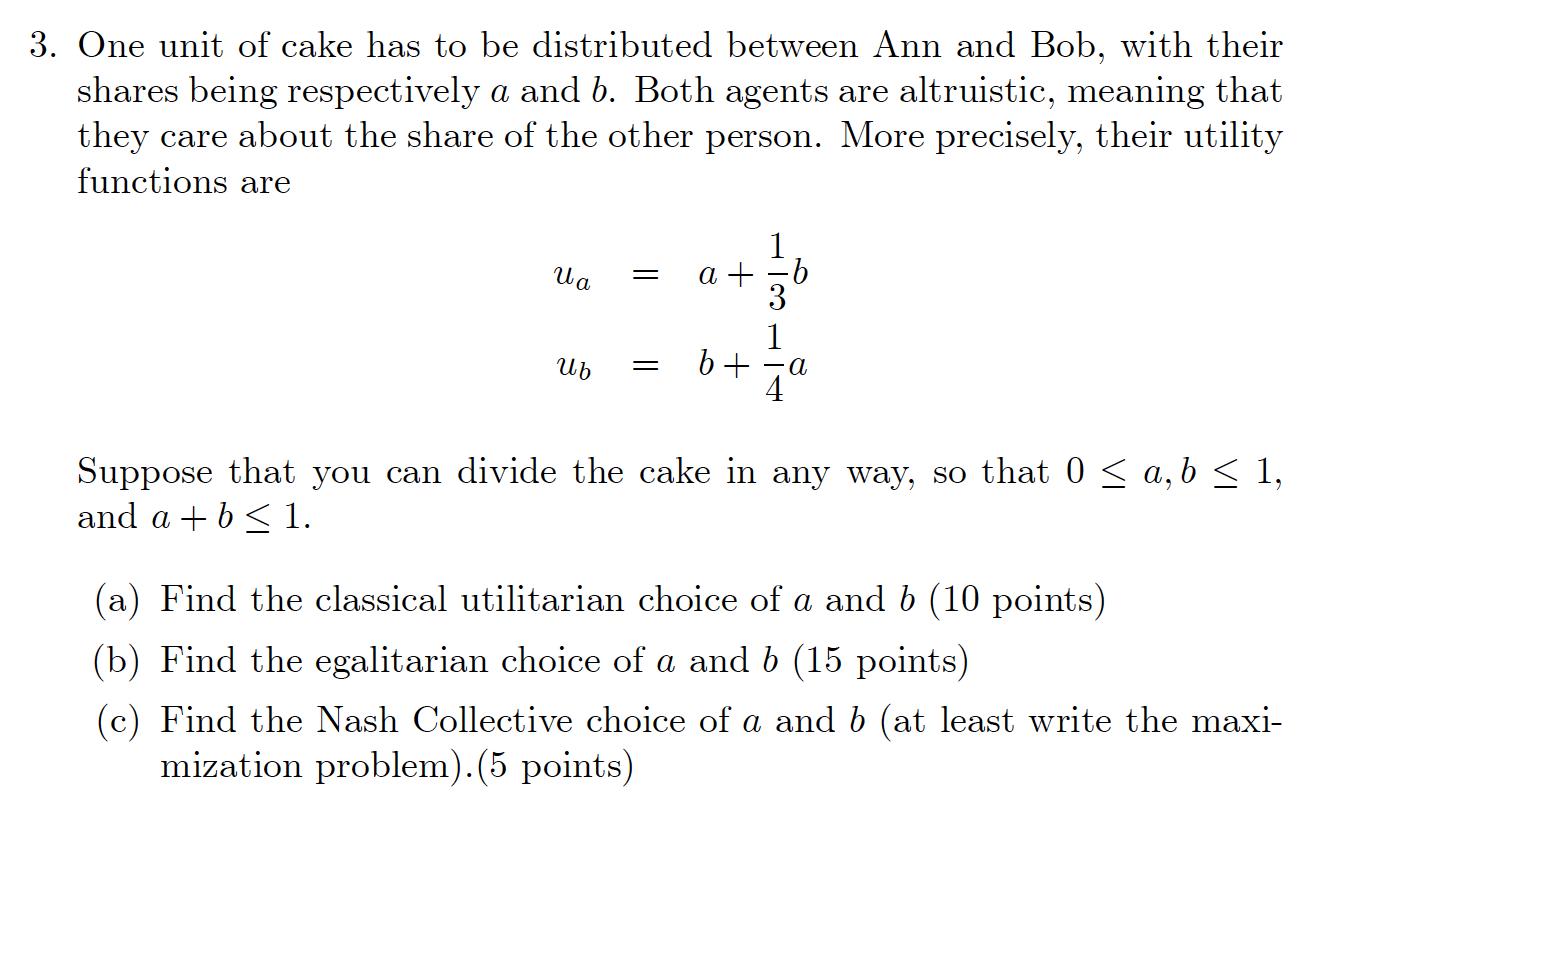 3. One unit of cake has to be distributed between Ann and Bob, with their shares being respectively a and b. Both agents are